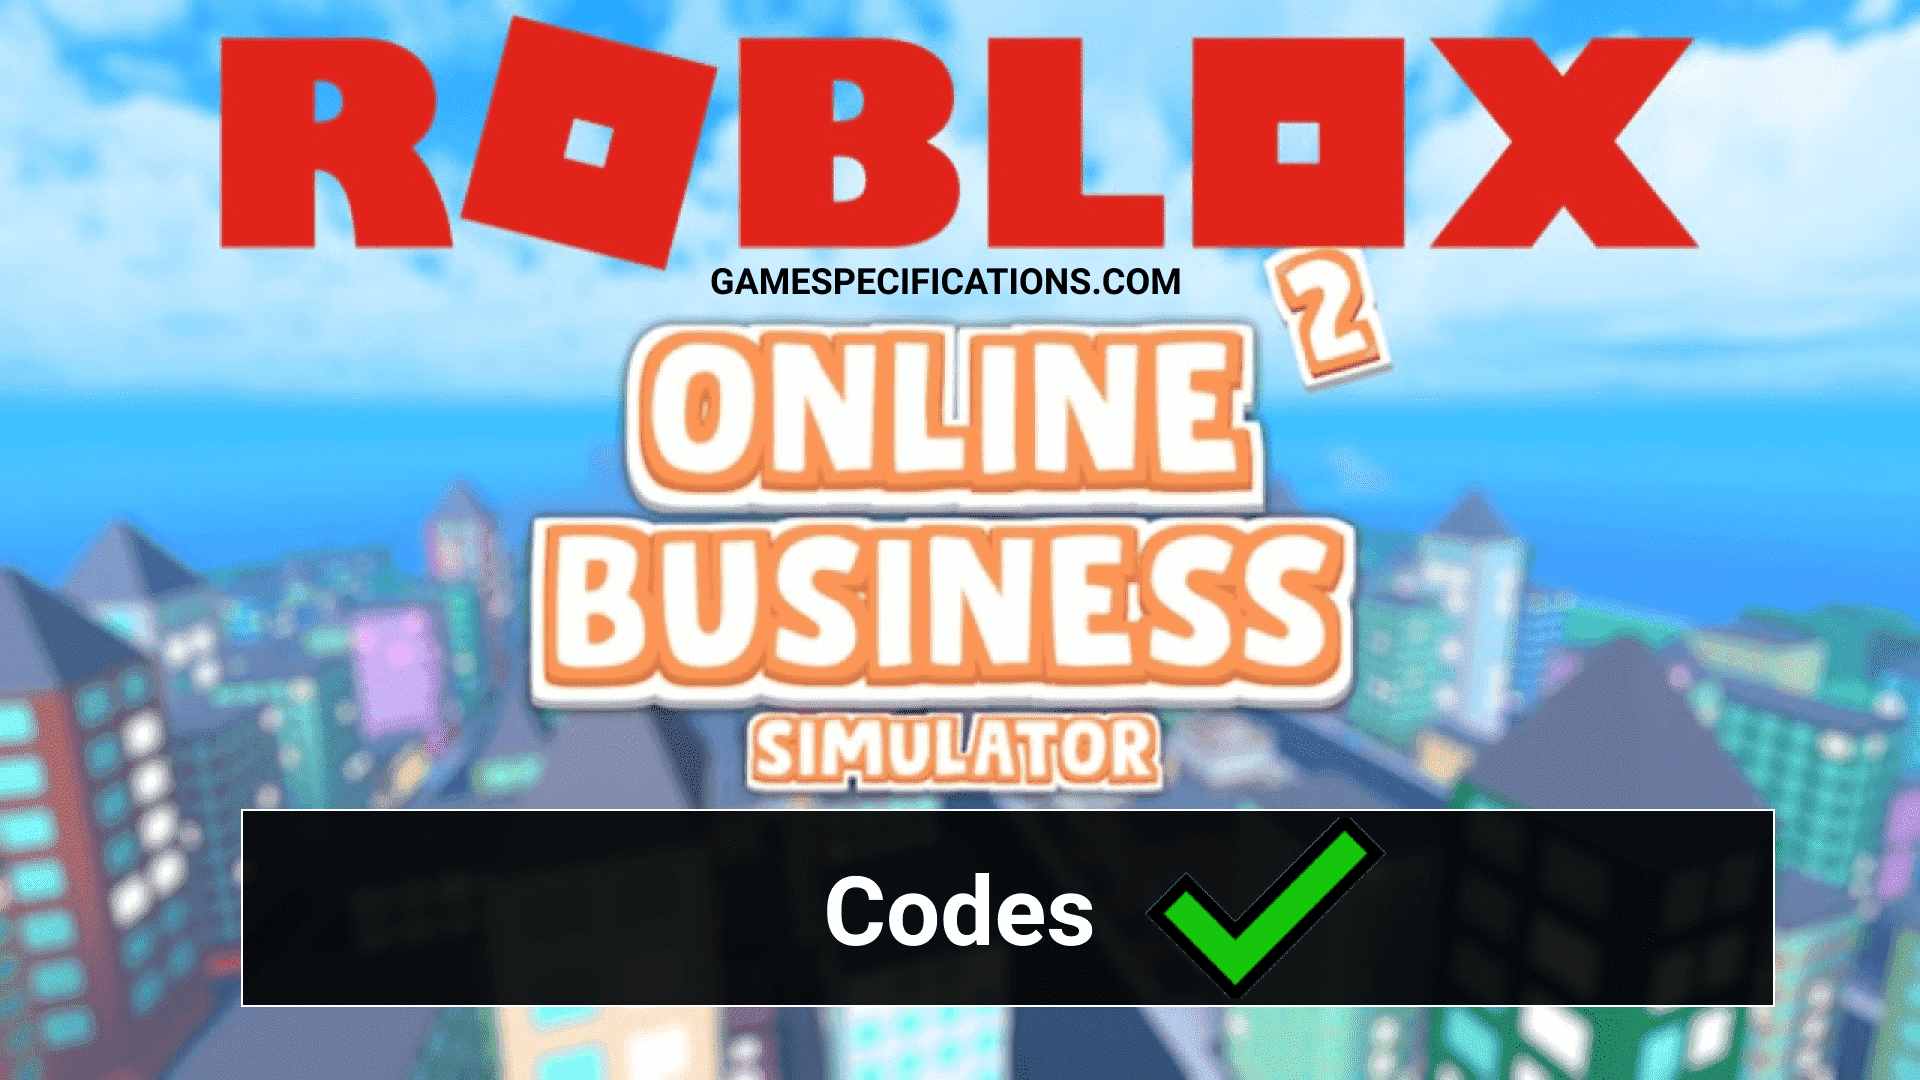 All Power Simulator 2 Codes Elemental Power Simulator Codes Roblox March 2021 Mejoress Where To Find More Codes Welcome To The Blog - codes for business simulator roblox wiki